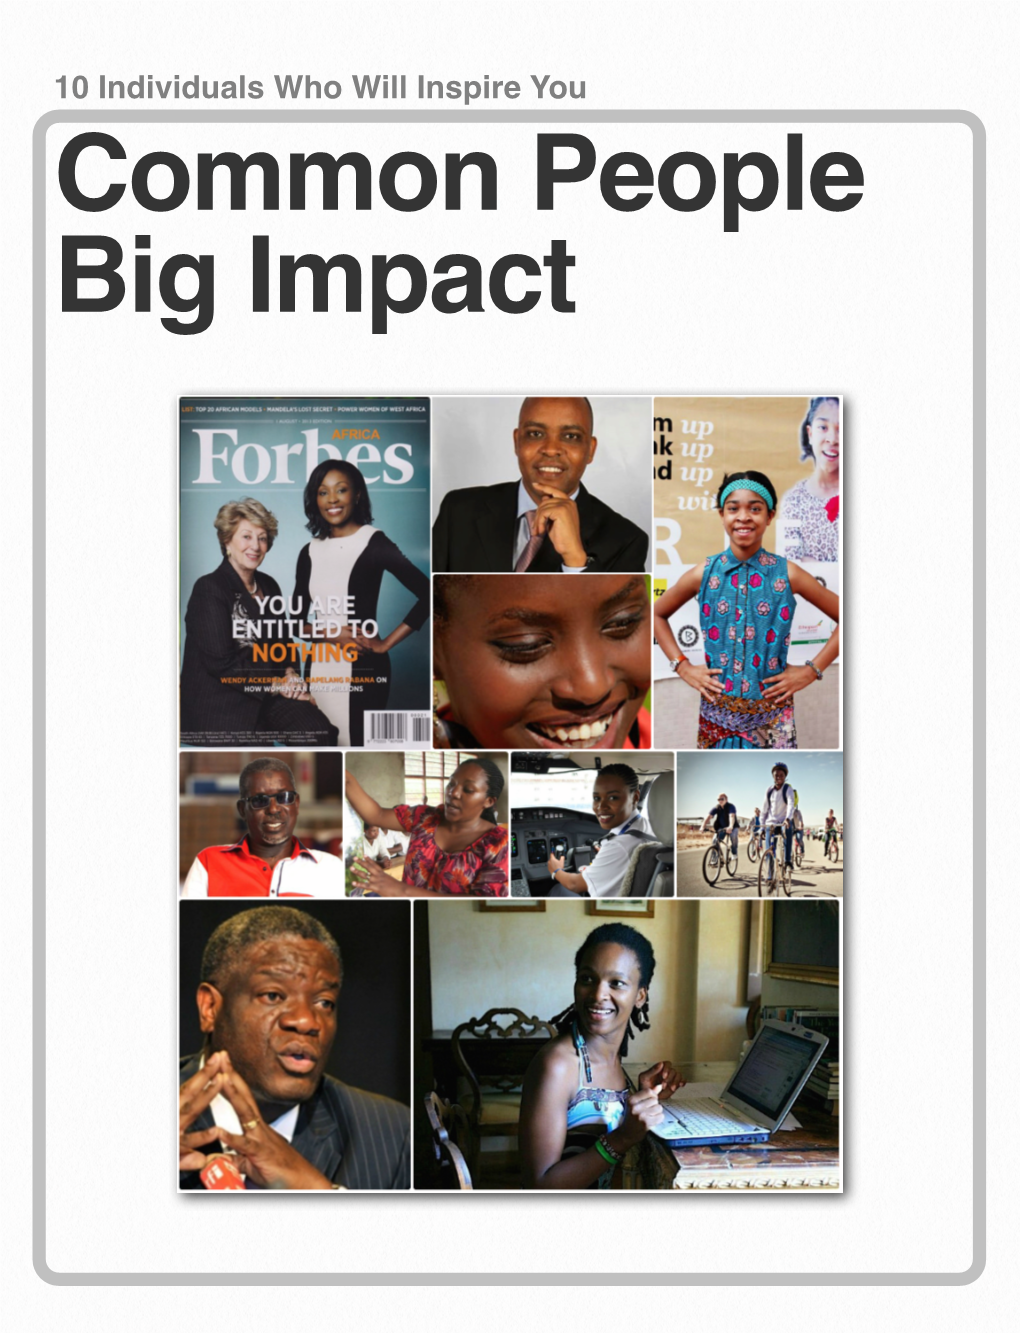 10 Individuals Who Will Inspire You Common People Big Impact 1 Nigeria’S Inspirational Author and Chika Unigwe Activist